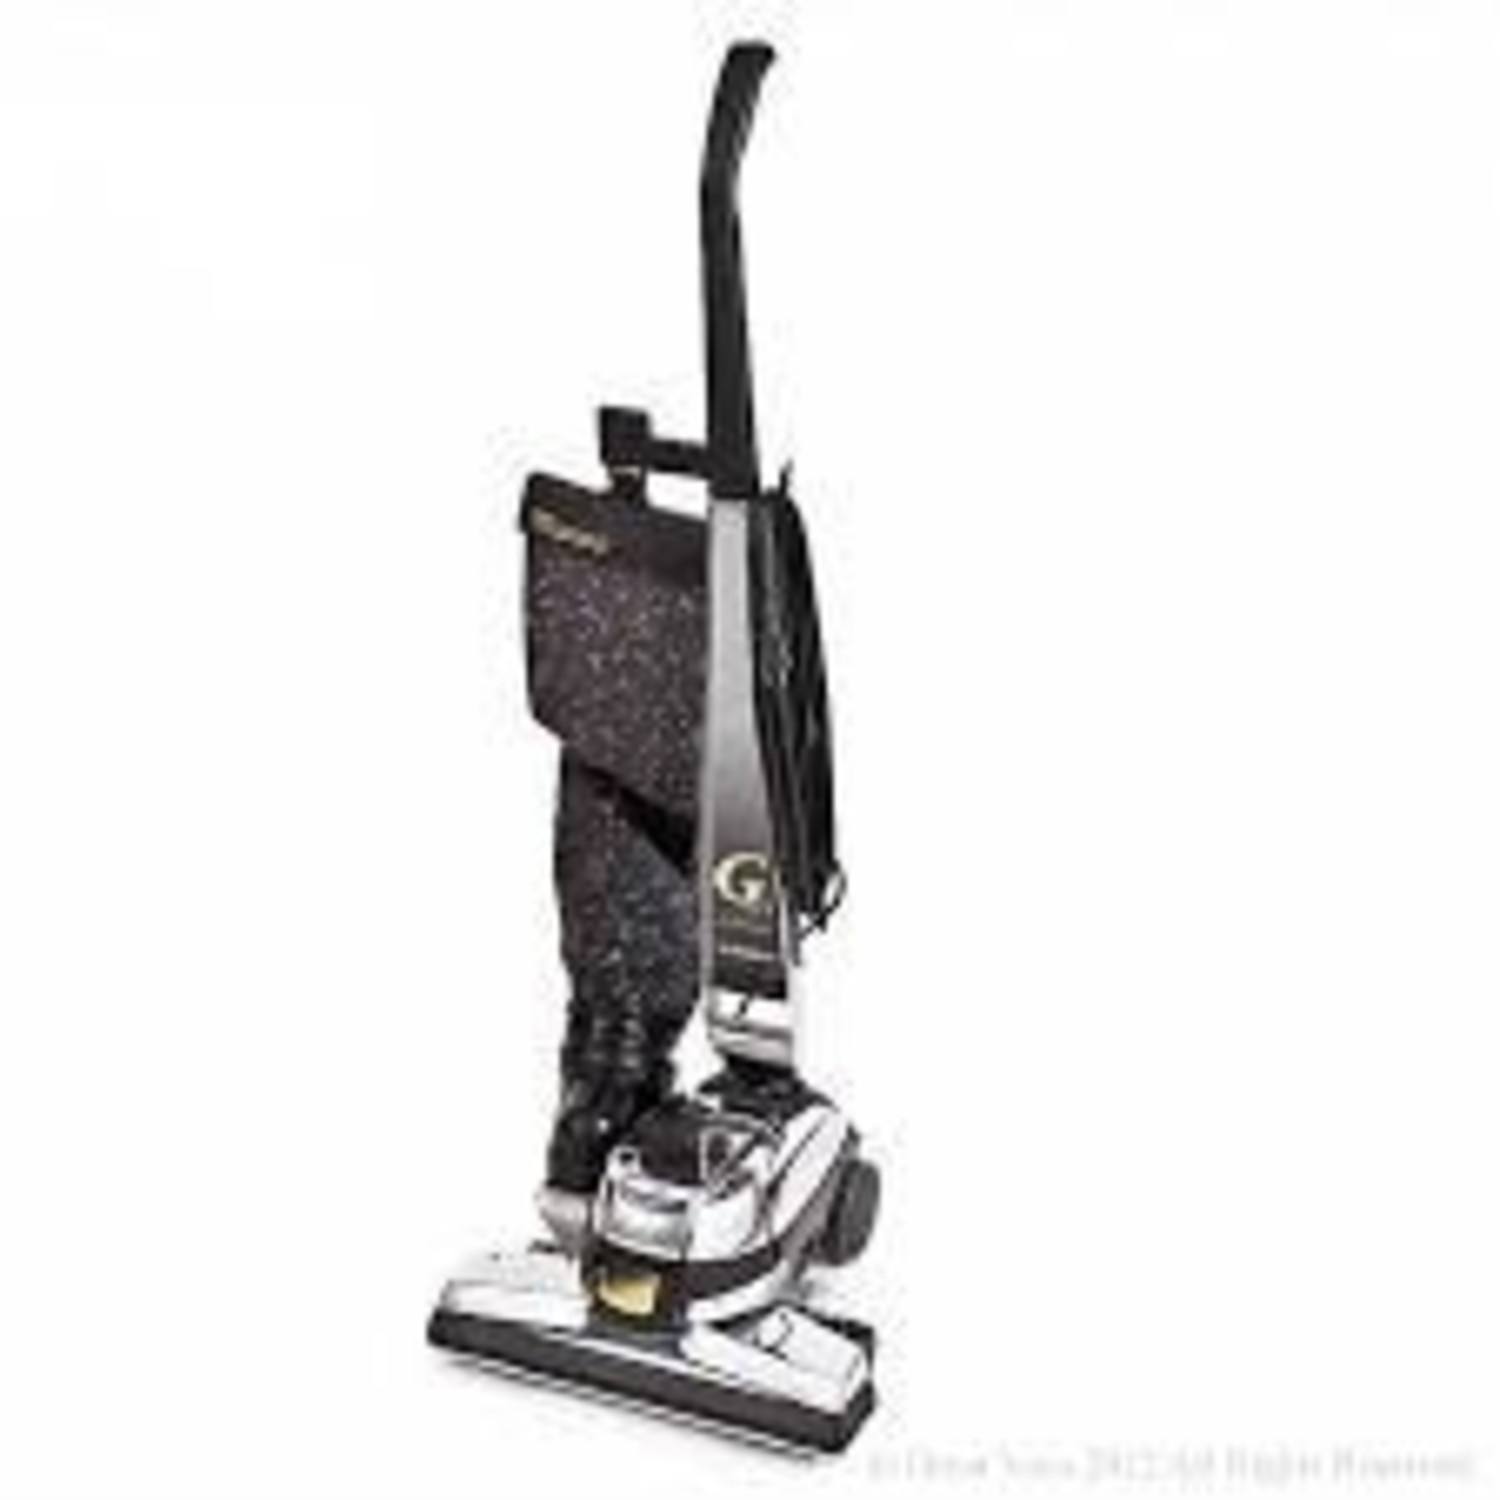 Kirby Kirby G5 - Reconditioned - MyVacuumPlace - Vacuums Etc